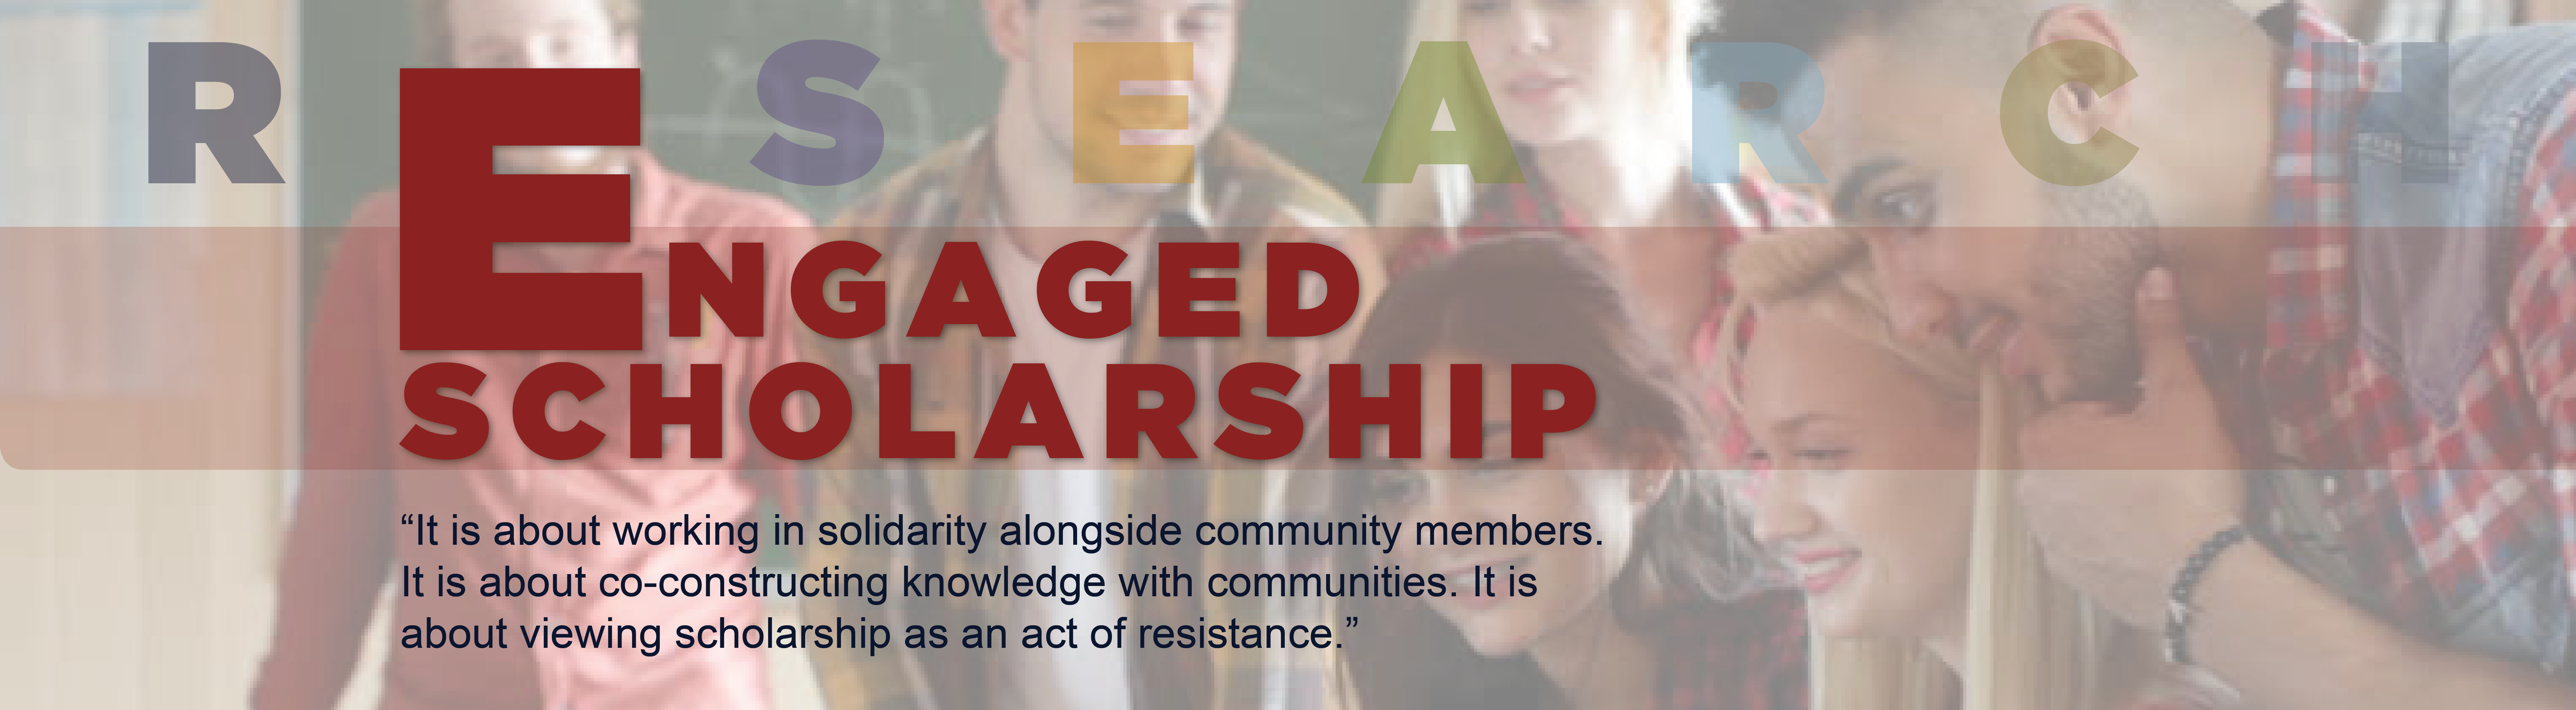 Engaged Scholarship: "It is about working in solidarity alongside the community members.  It is about co-constructing knowledge with communities.  It is about viewing scholarship as an act of resistance" -Quote by Dr. Erica Fernandez